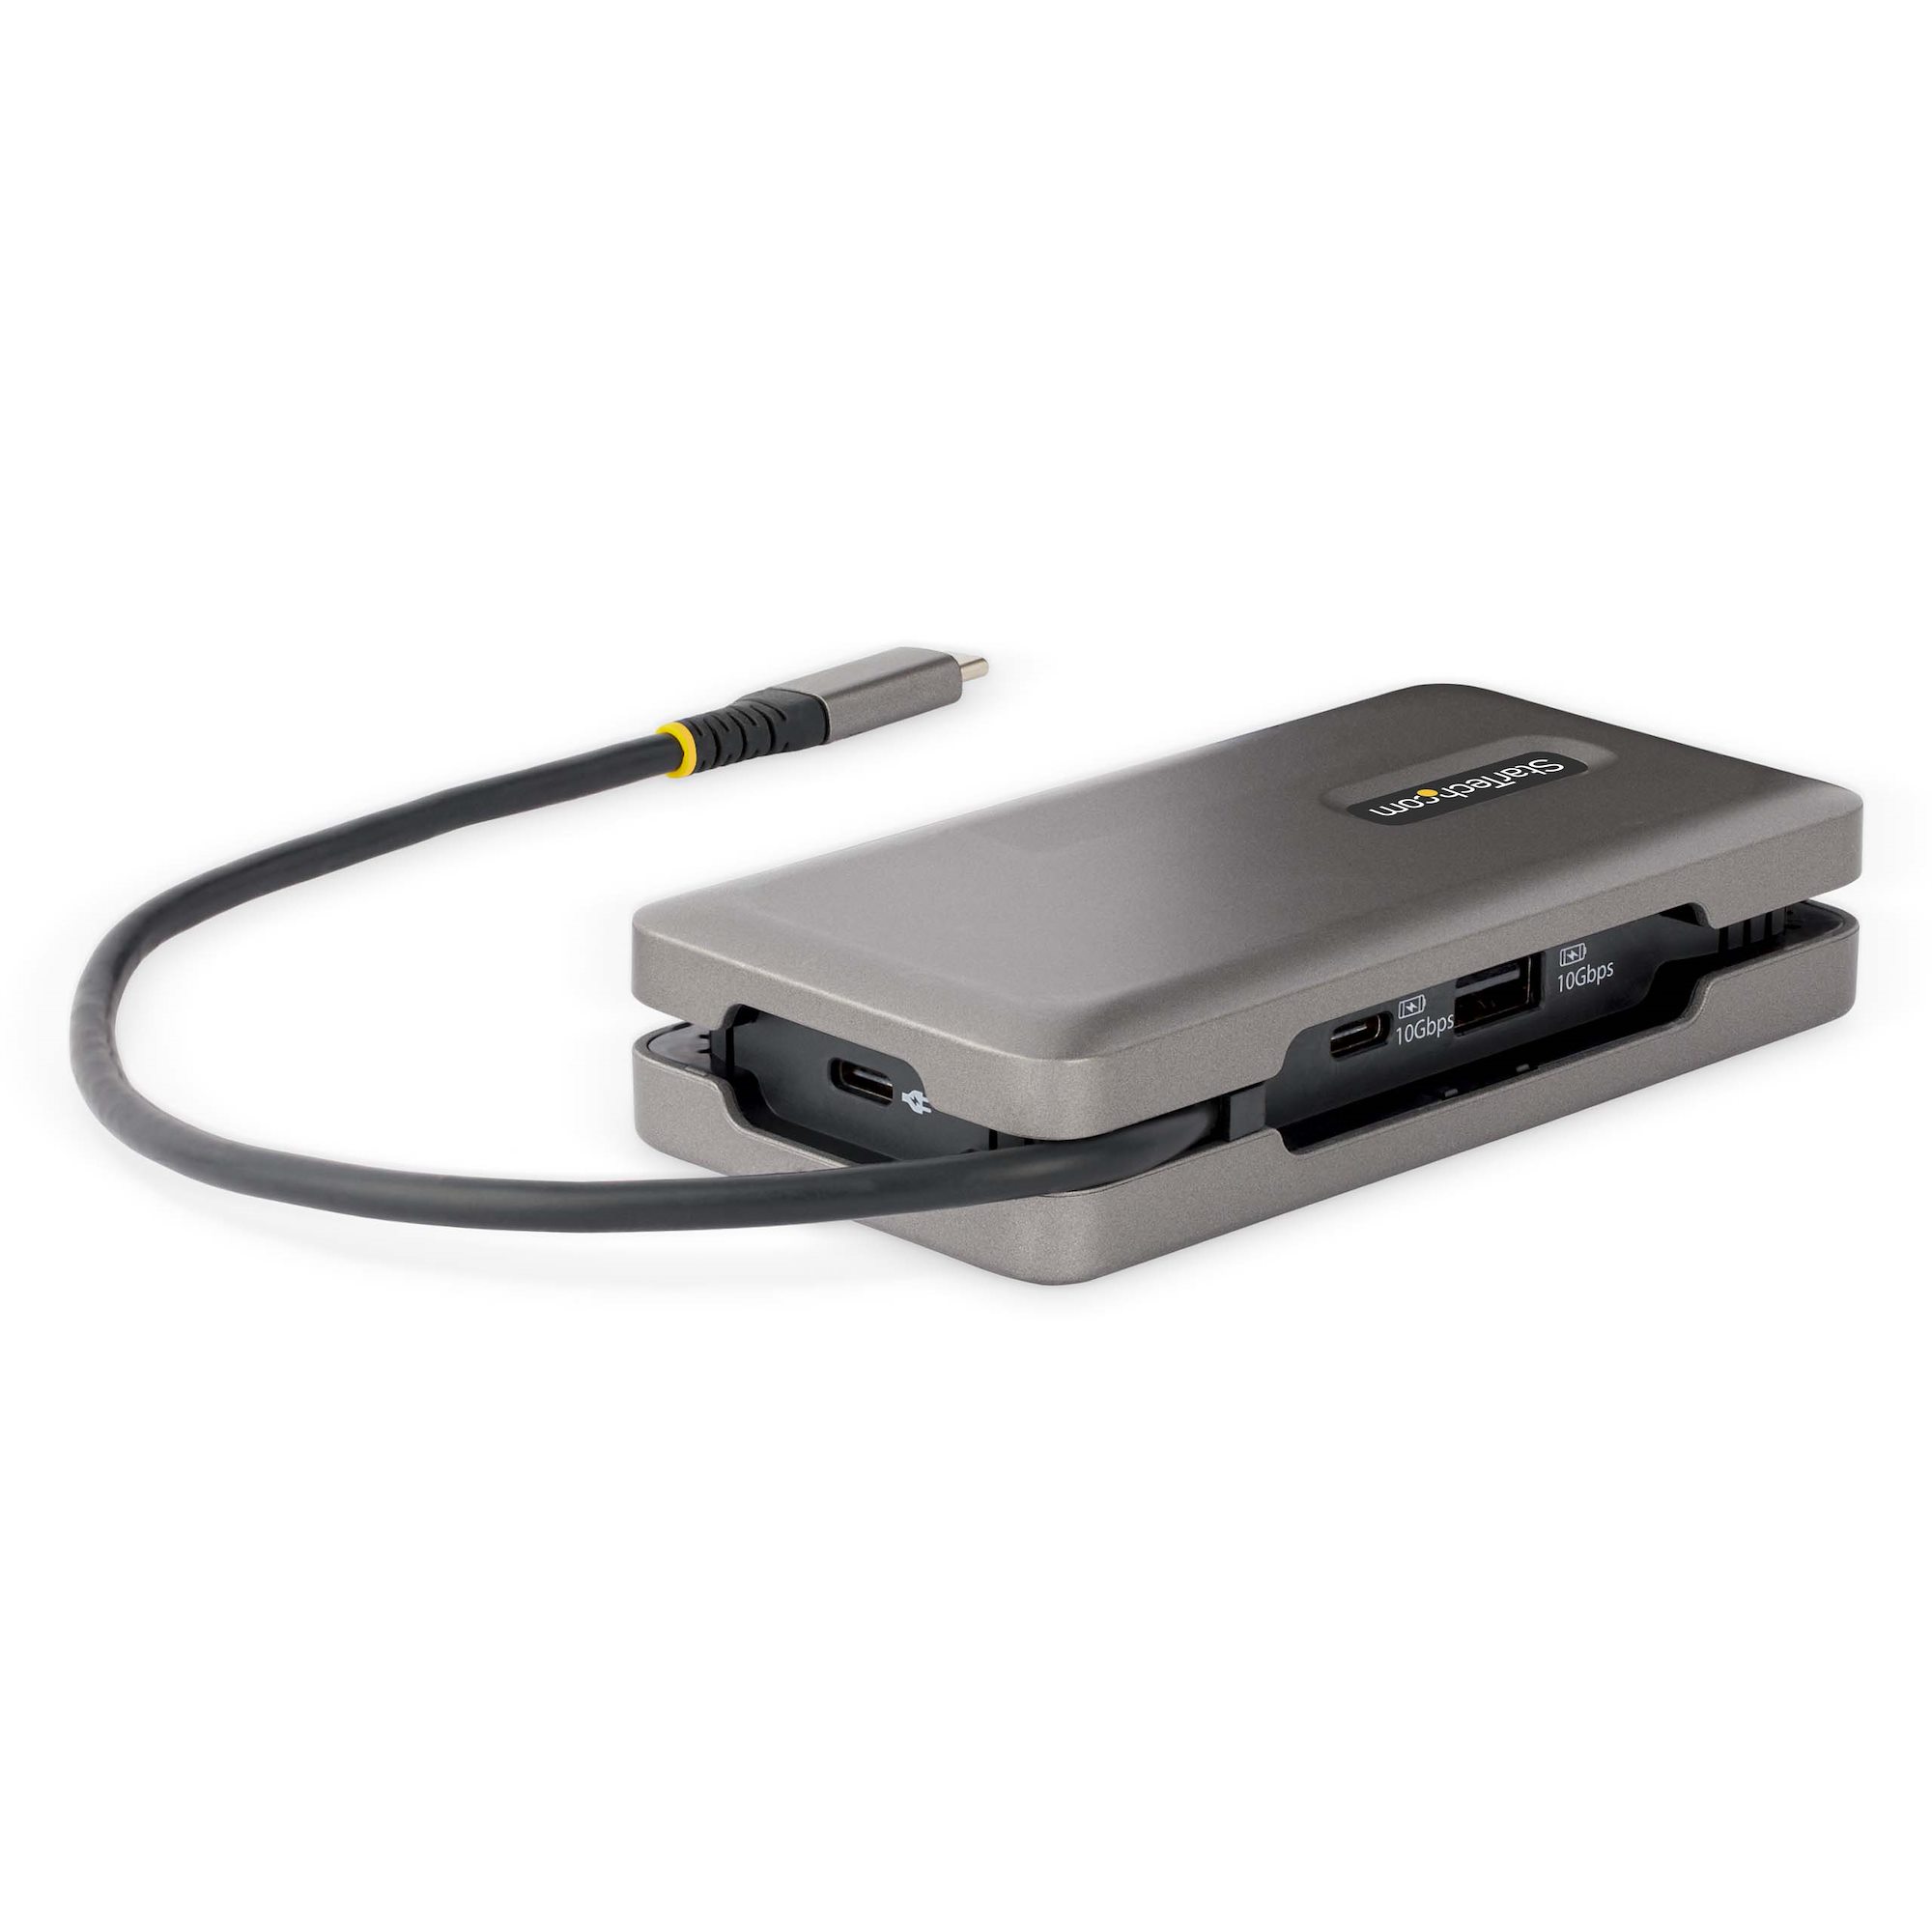 USB C Multiport Adapter HDMI/mDP 4K 60Hz - USB-C Multiport Adapters, Universal Laptop Docking Stations